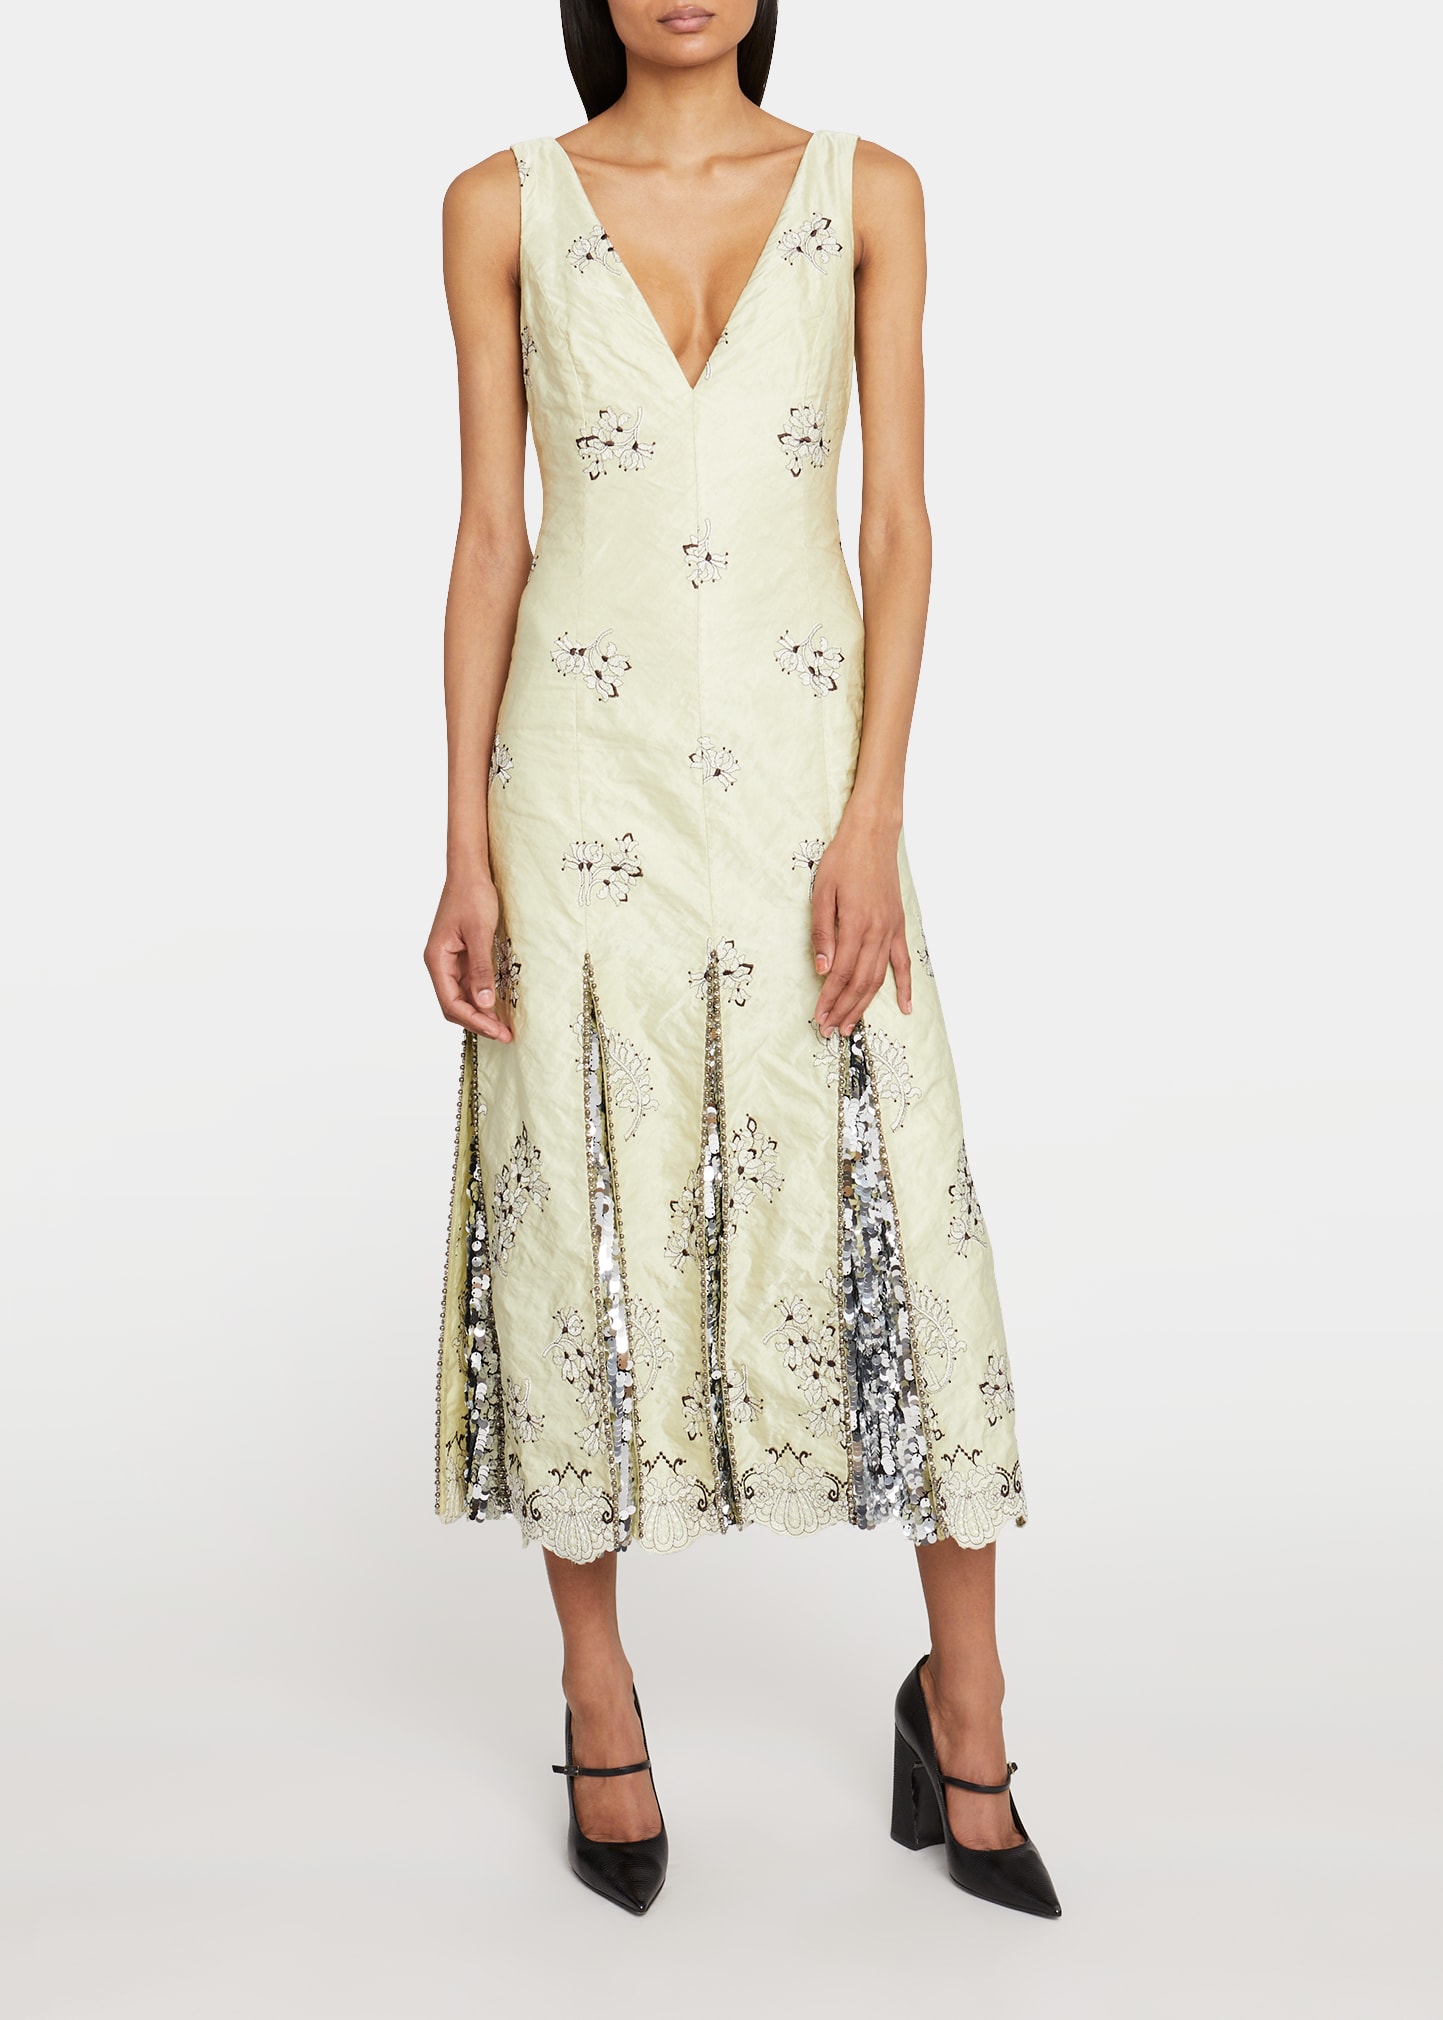 Samuela Lace-Embroidered Scallop Dress